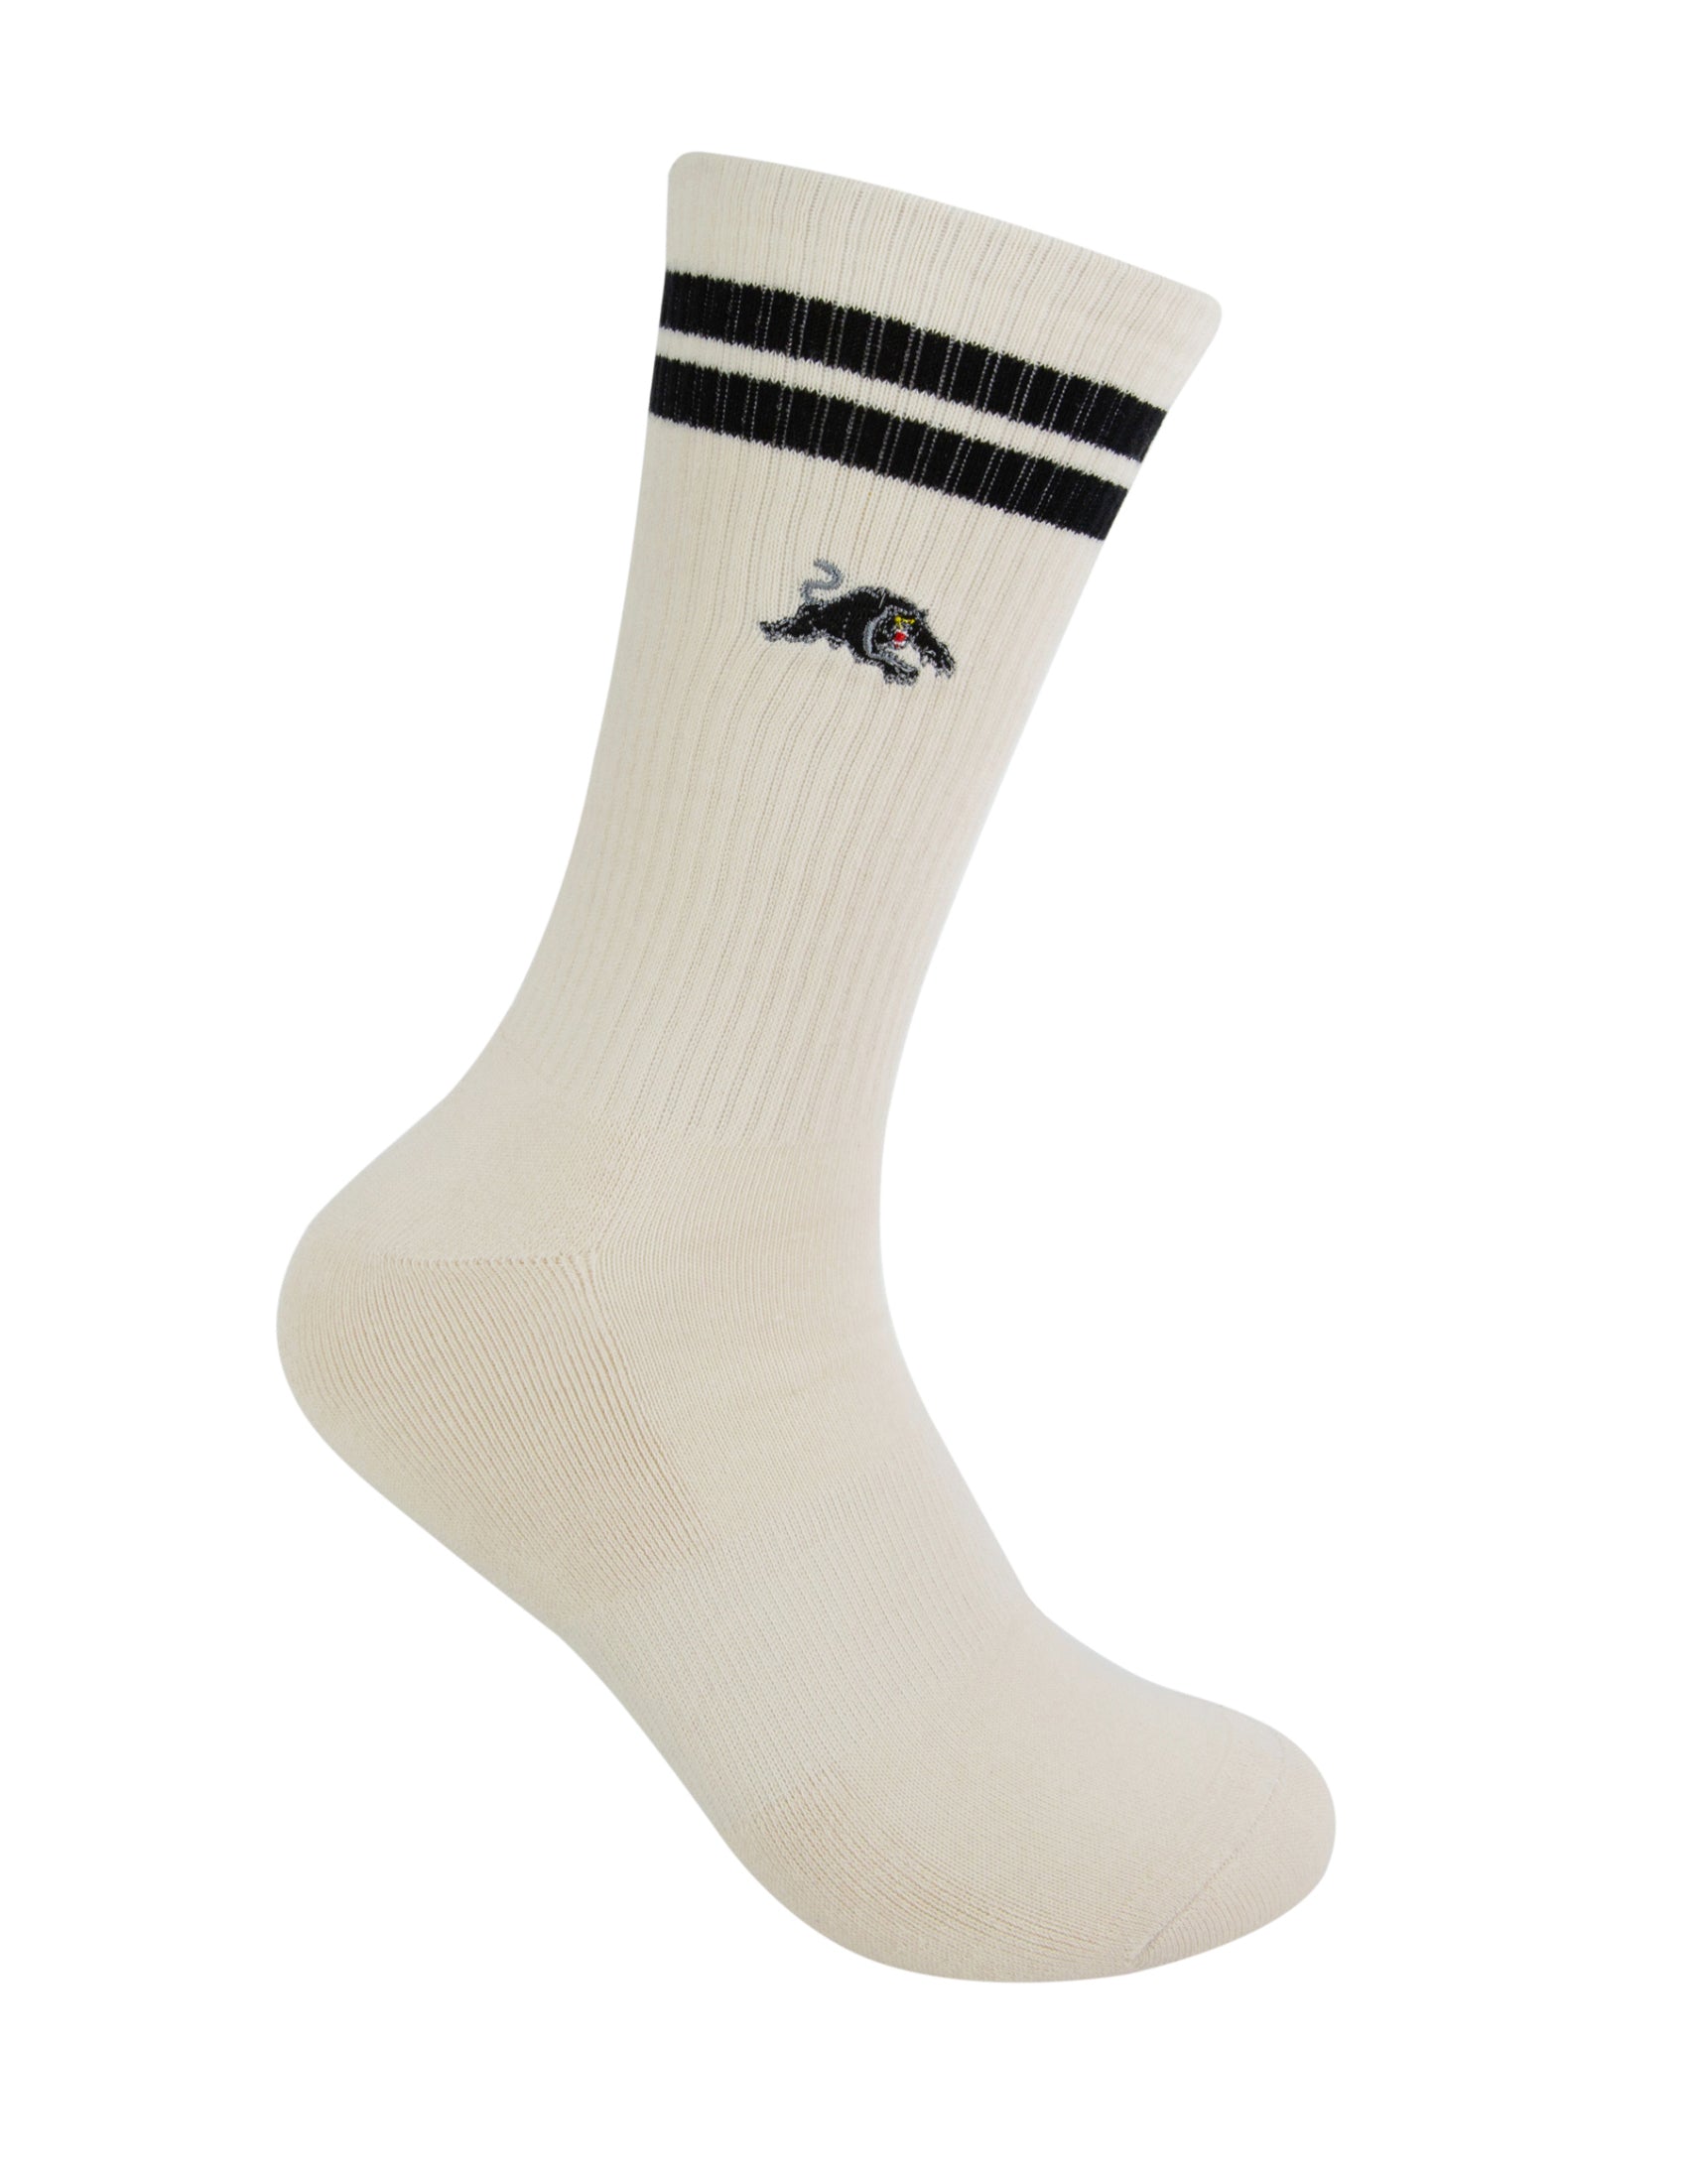 Penrith Panthers Icons Sneaker Socks 2 Pack